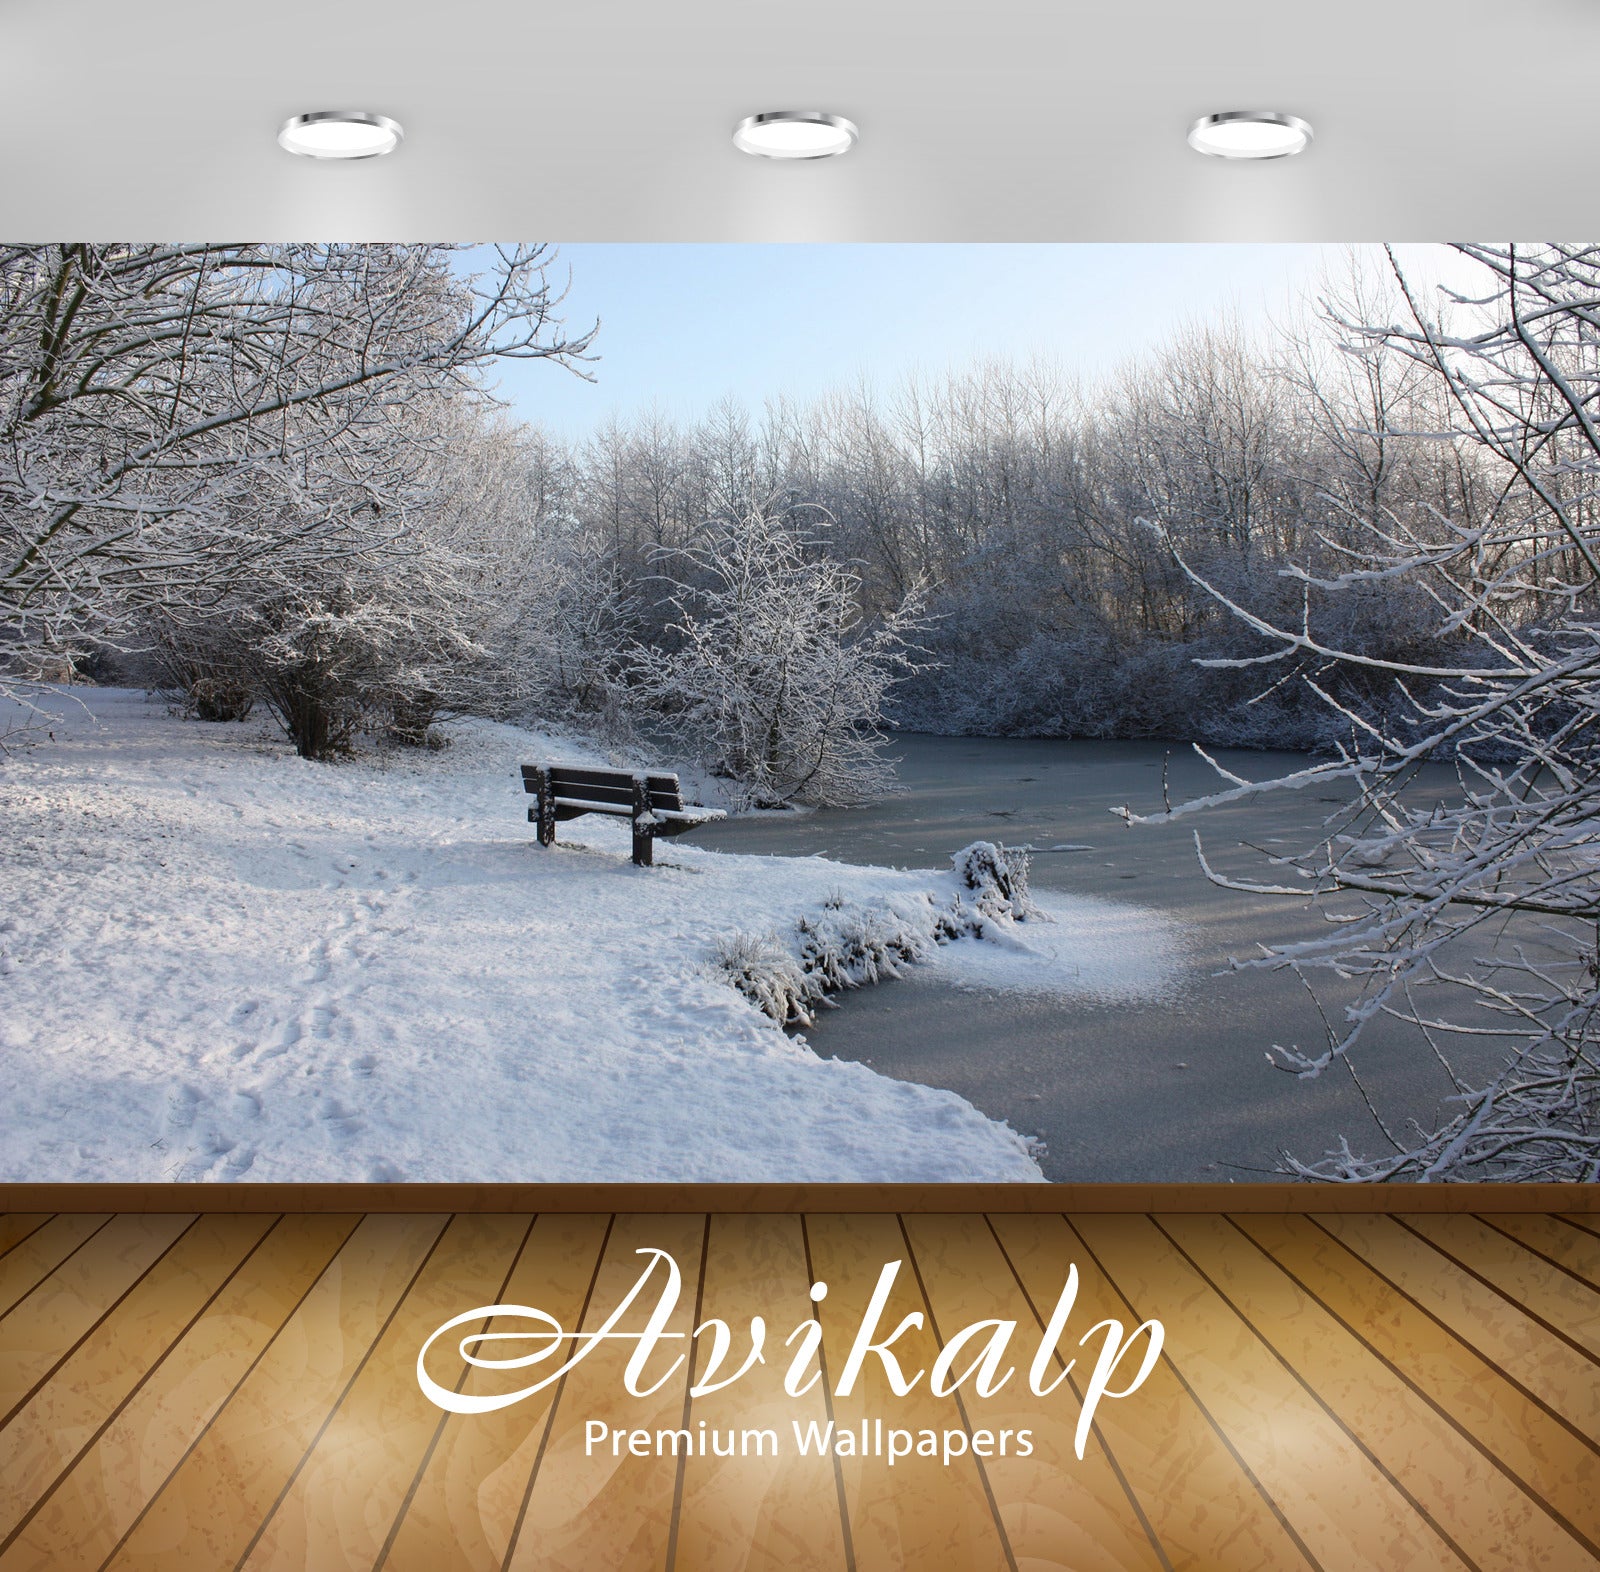 Avikalp Exclusive Awi6253 Snowy Bench By The Frozen River Nature Full HD Wallpapers for Living room,